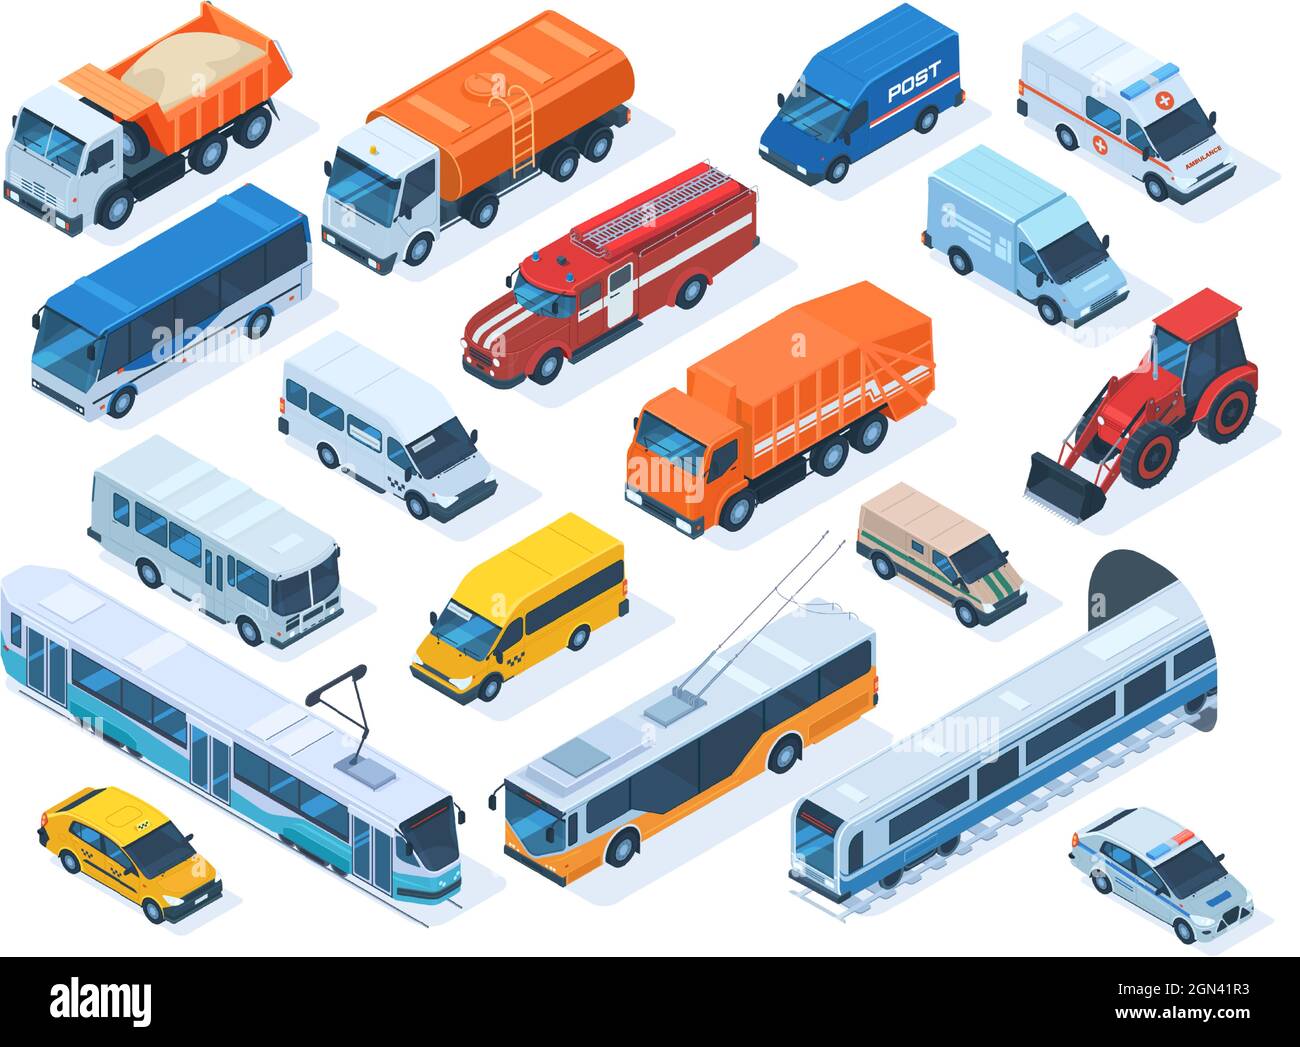 Isometric public services transport, taxi, ambulance and police car. Urban vehicles, fire engine, public bus, construction truck vector illustration Stock Vector